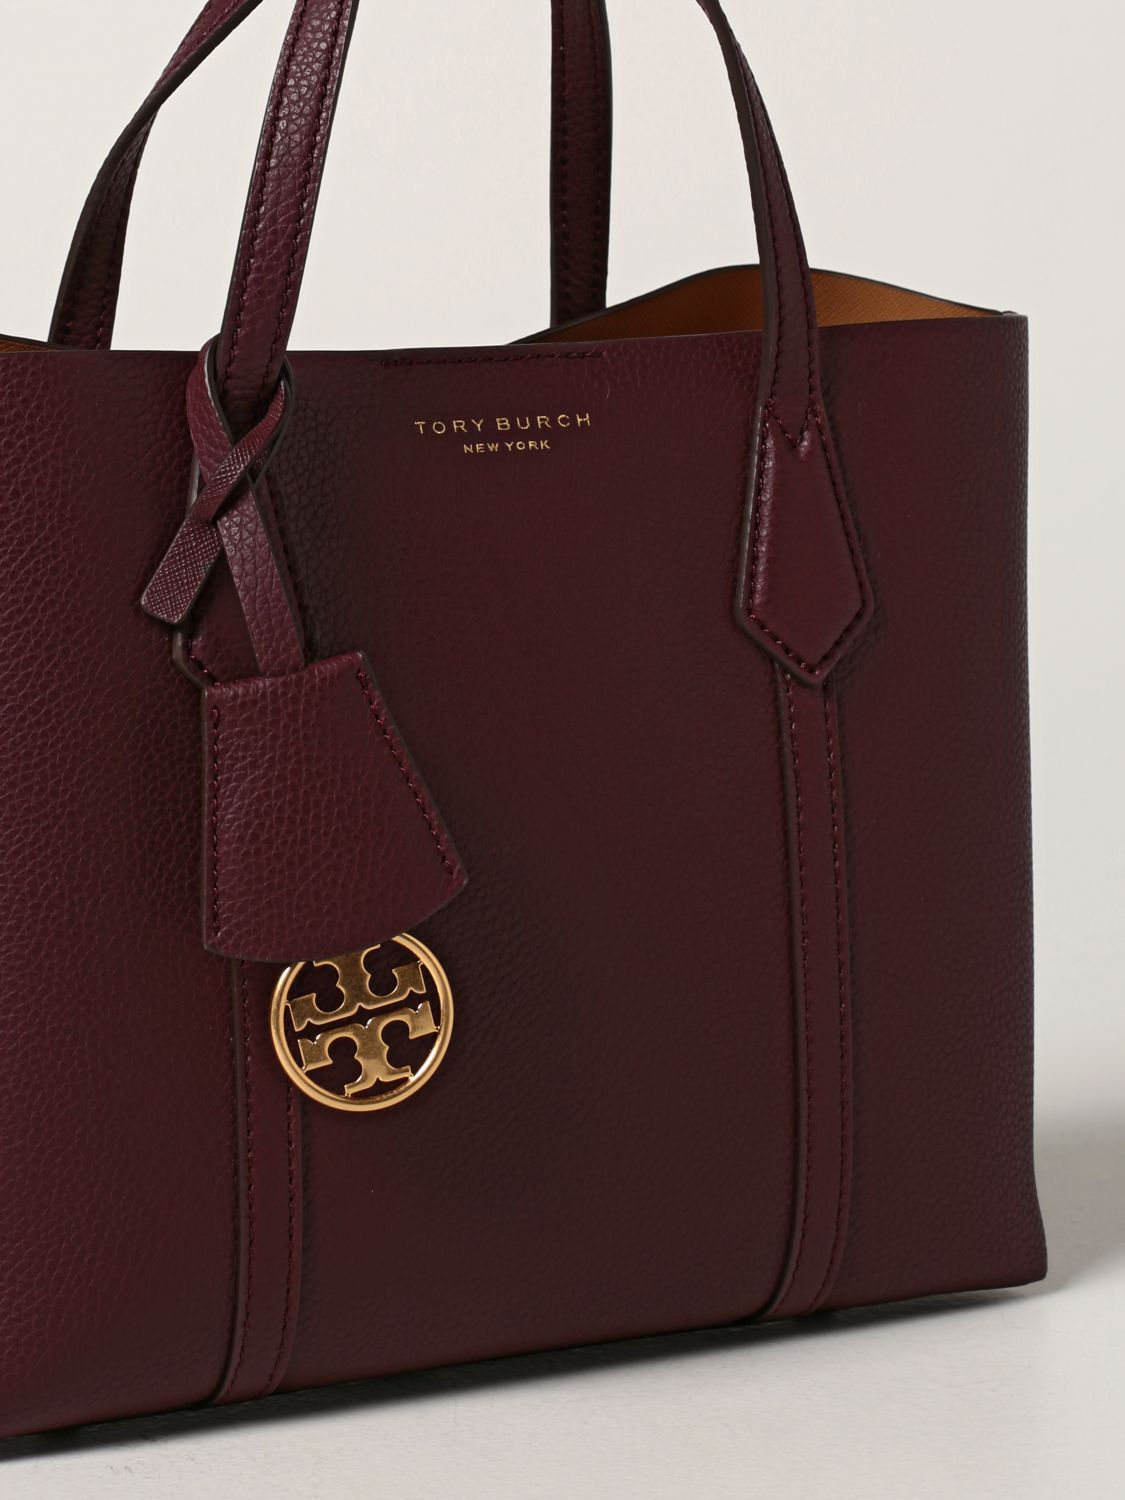 TORY BURCH: Perry bag in textured leather - Burgundy | Tory Burch handbag  81928 online on 